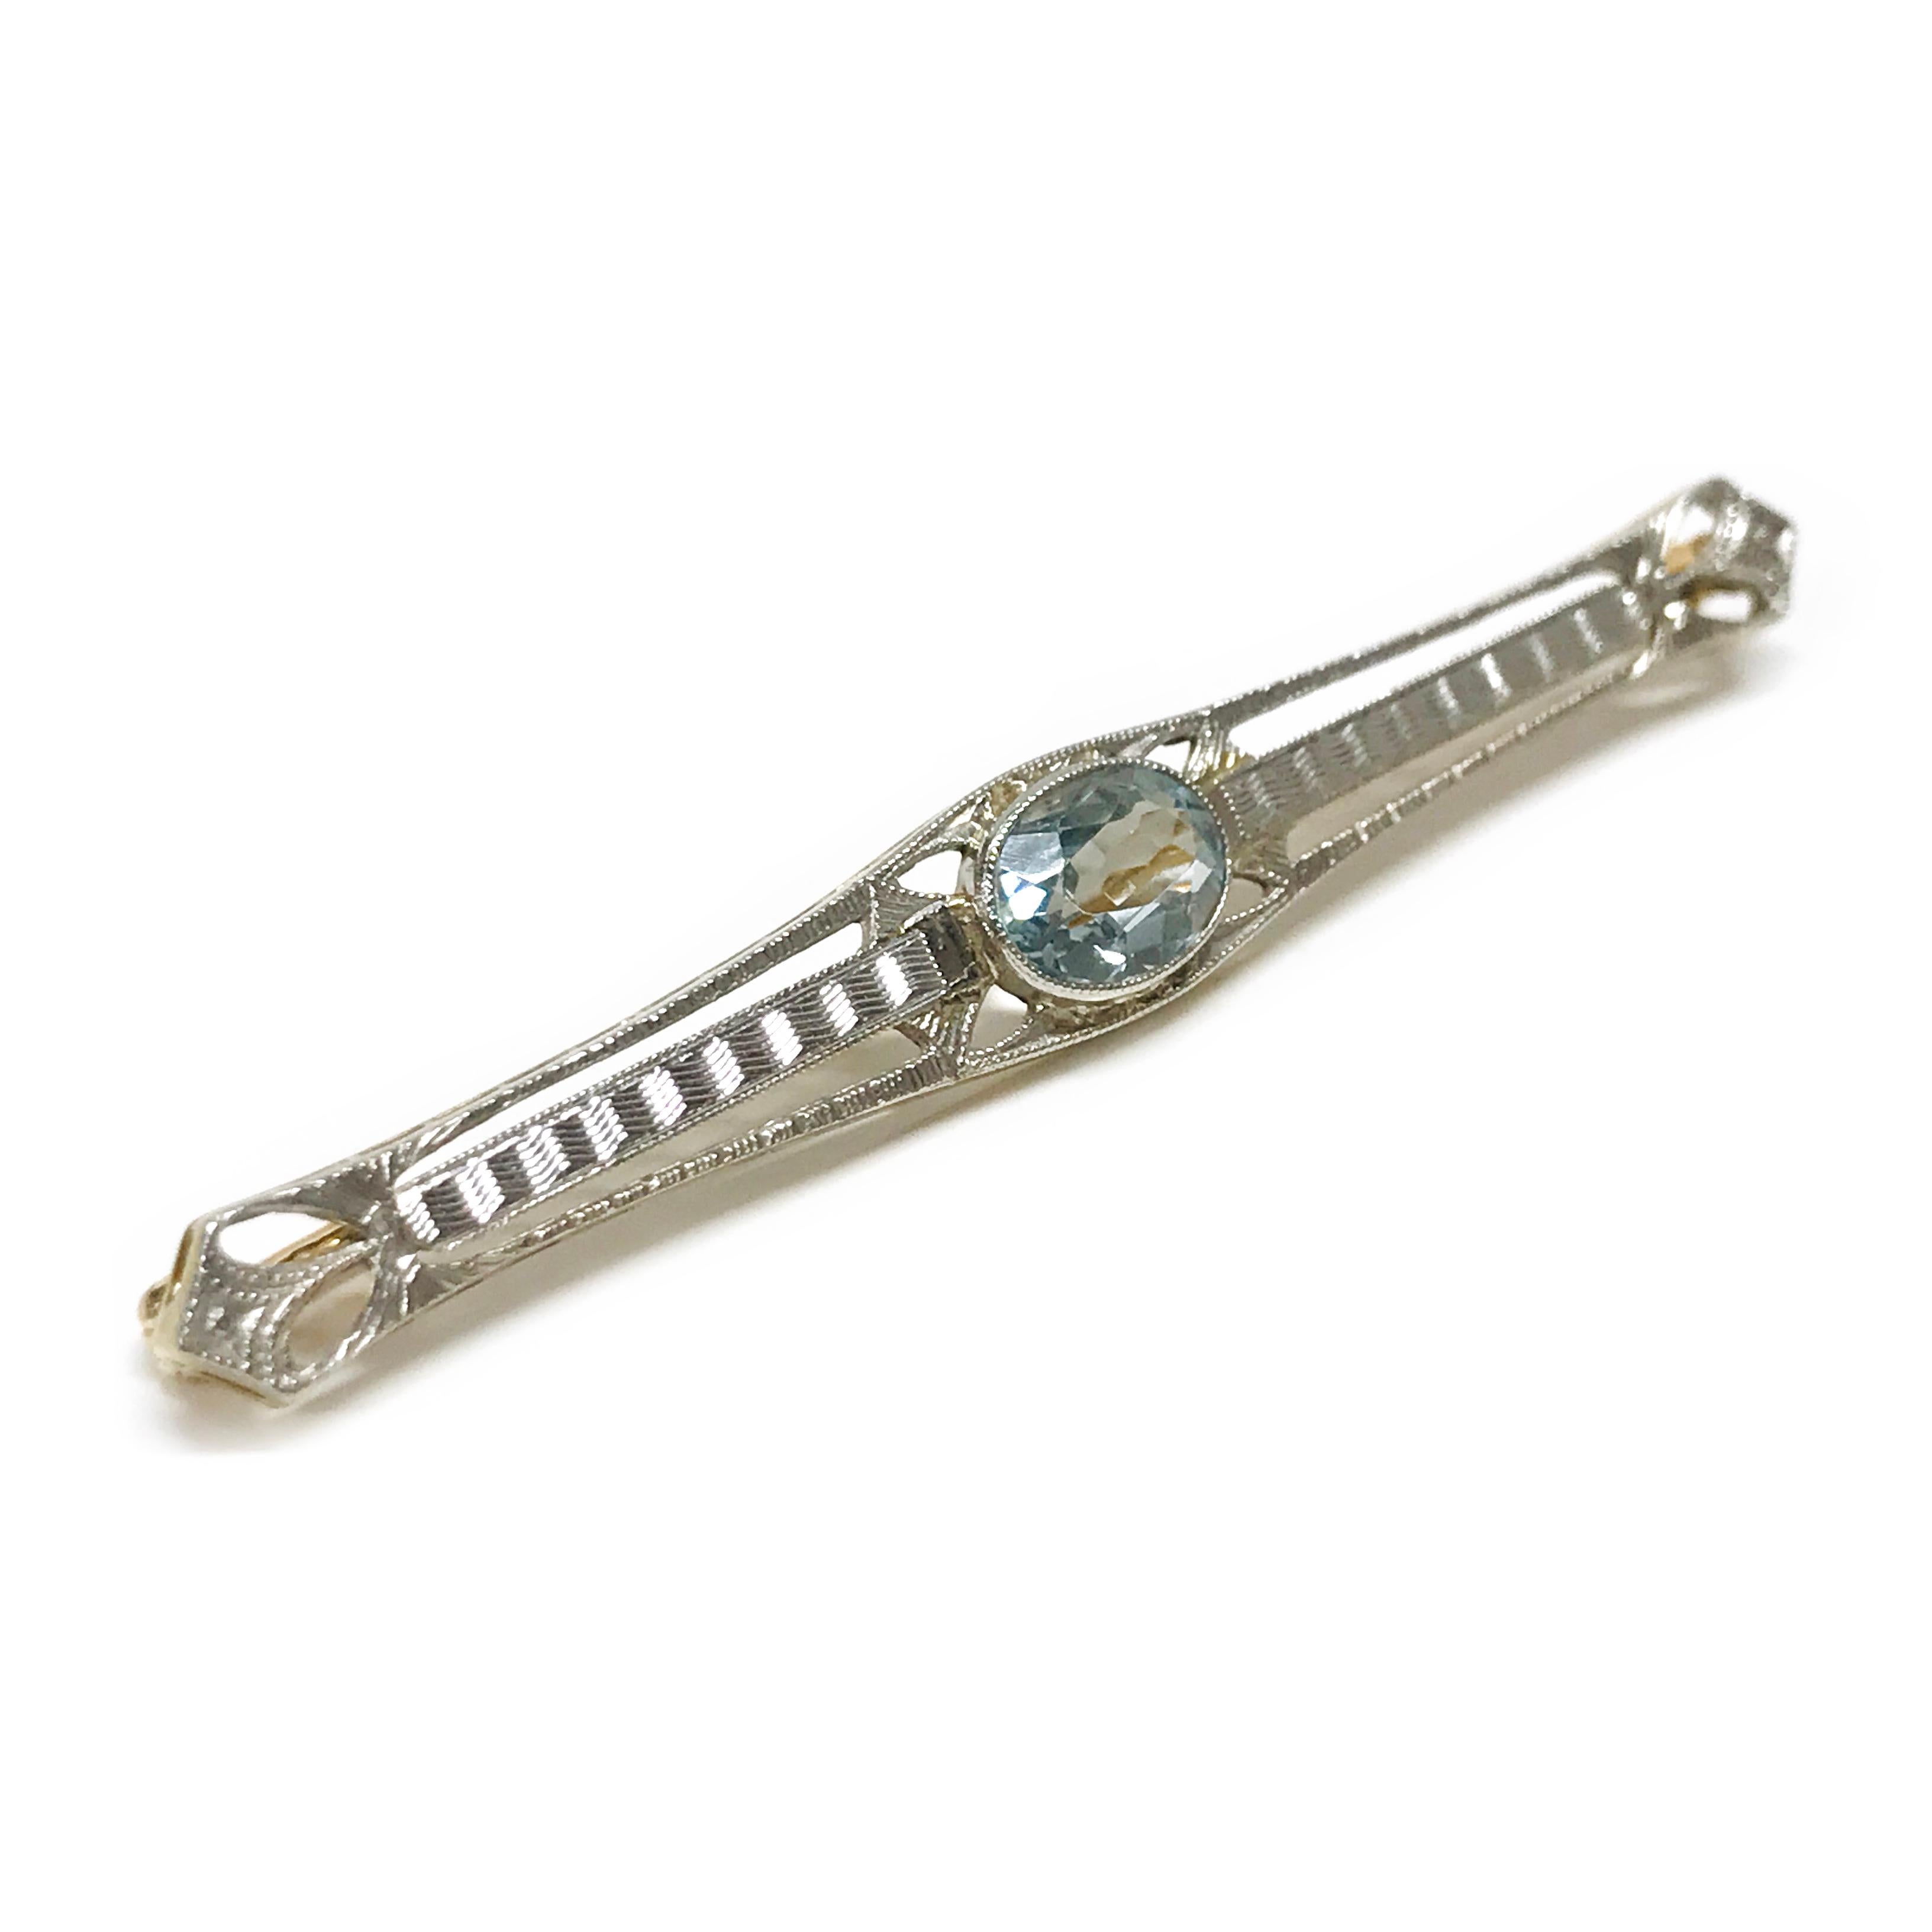 14 Karat Two-Tone Aquamarine Pin/Brooch. This is a special piece full of detail in both white and yellow gold. The 8x6mm oval-cut aquamarine is bezel set with milgrain detail. The total weight of the stone is 1.20ct. The pin/brooch measures 58 x